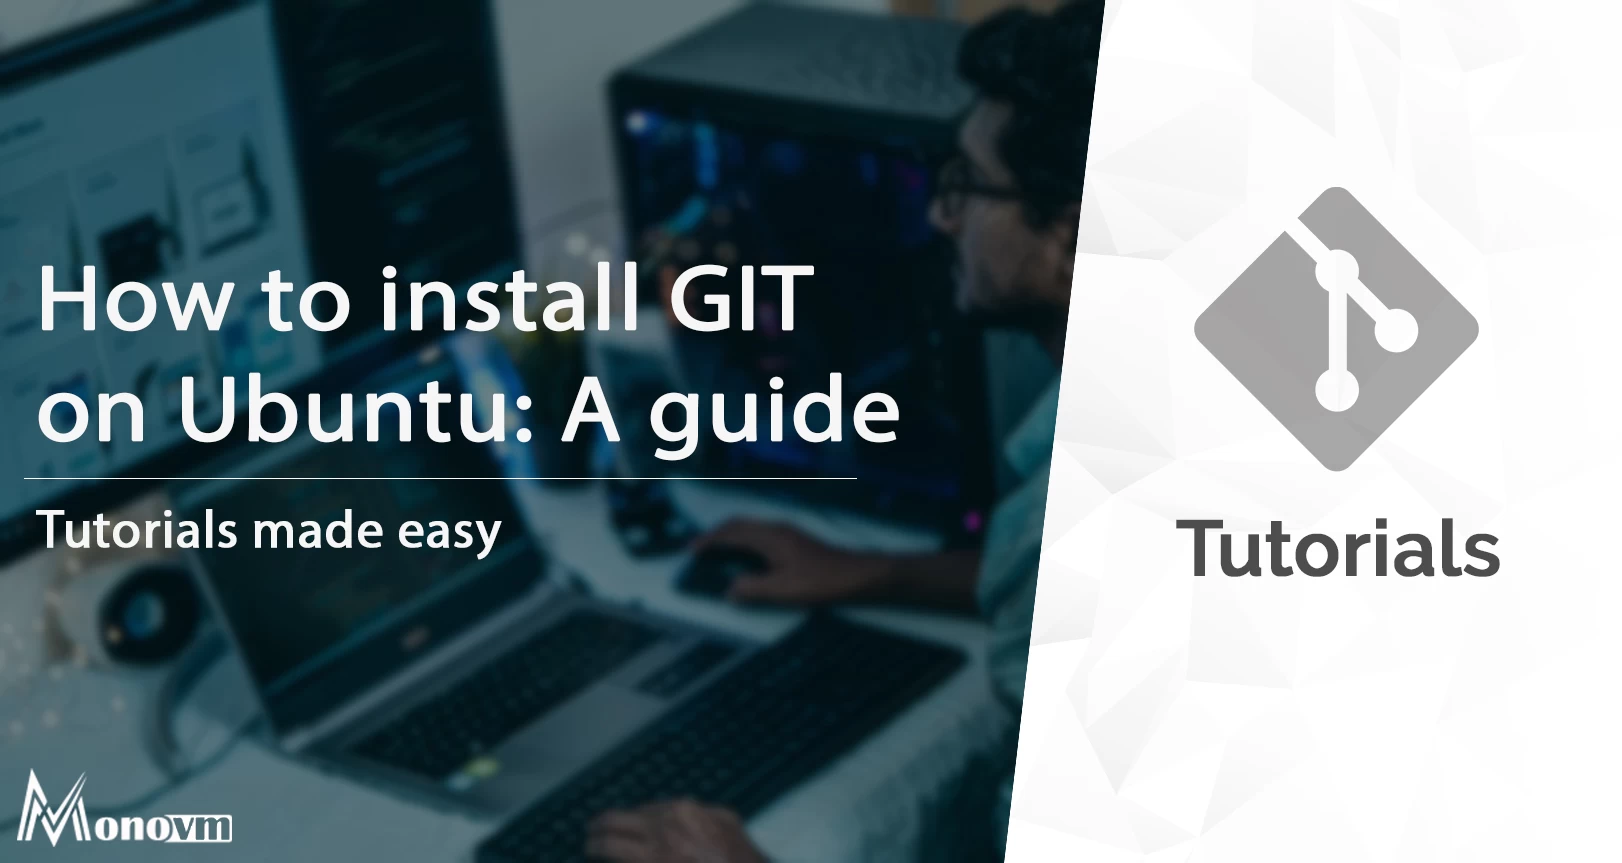 How To Install Git on Ubuntu in just 15 minutes